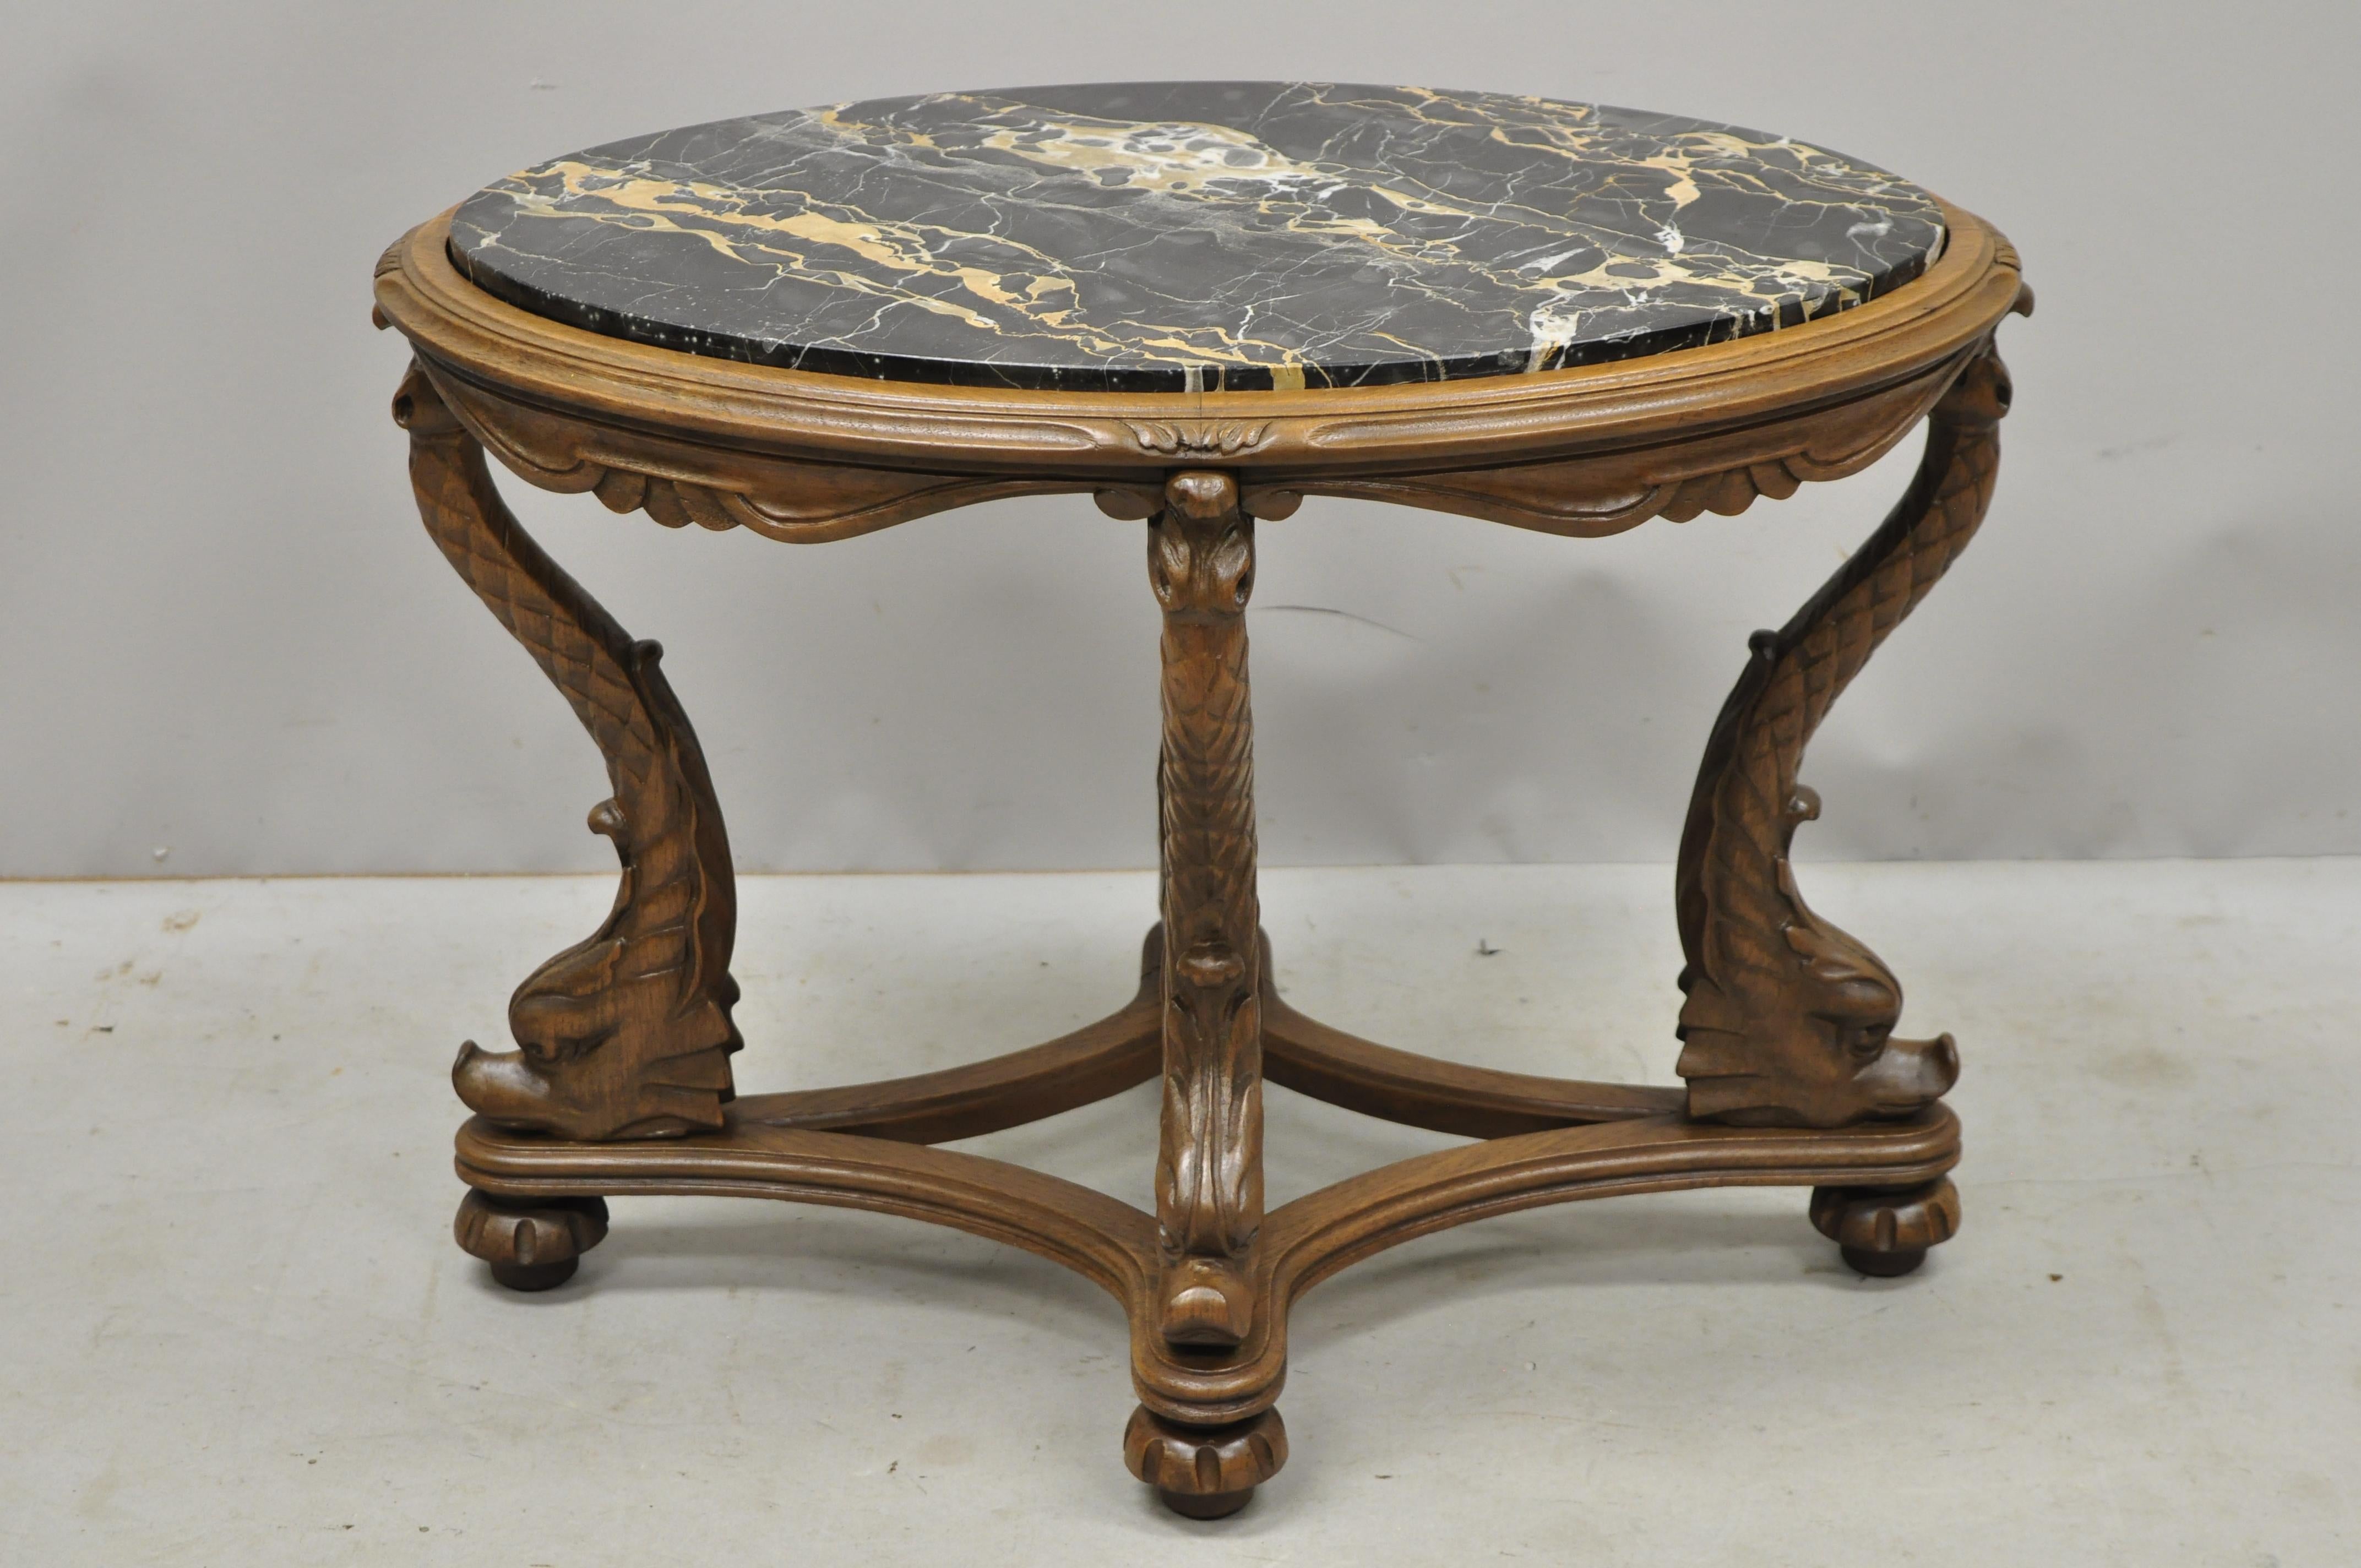 Antique Italian Regency serpent carved pedestal marble-top small coffee side table. Item features inset marble top, full serpent carved supports, oval form, nice smaller size, very nice antique item, great style and form, circa early to mid-20th